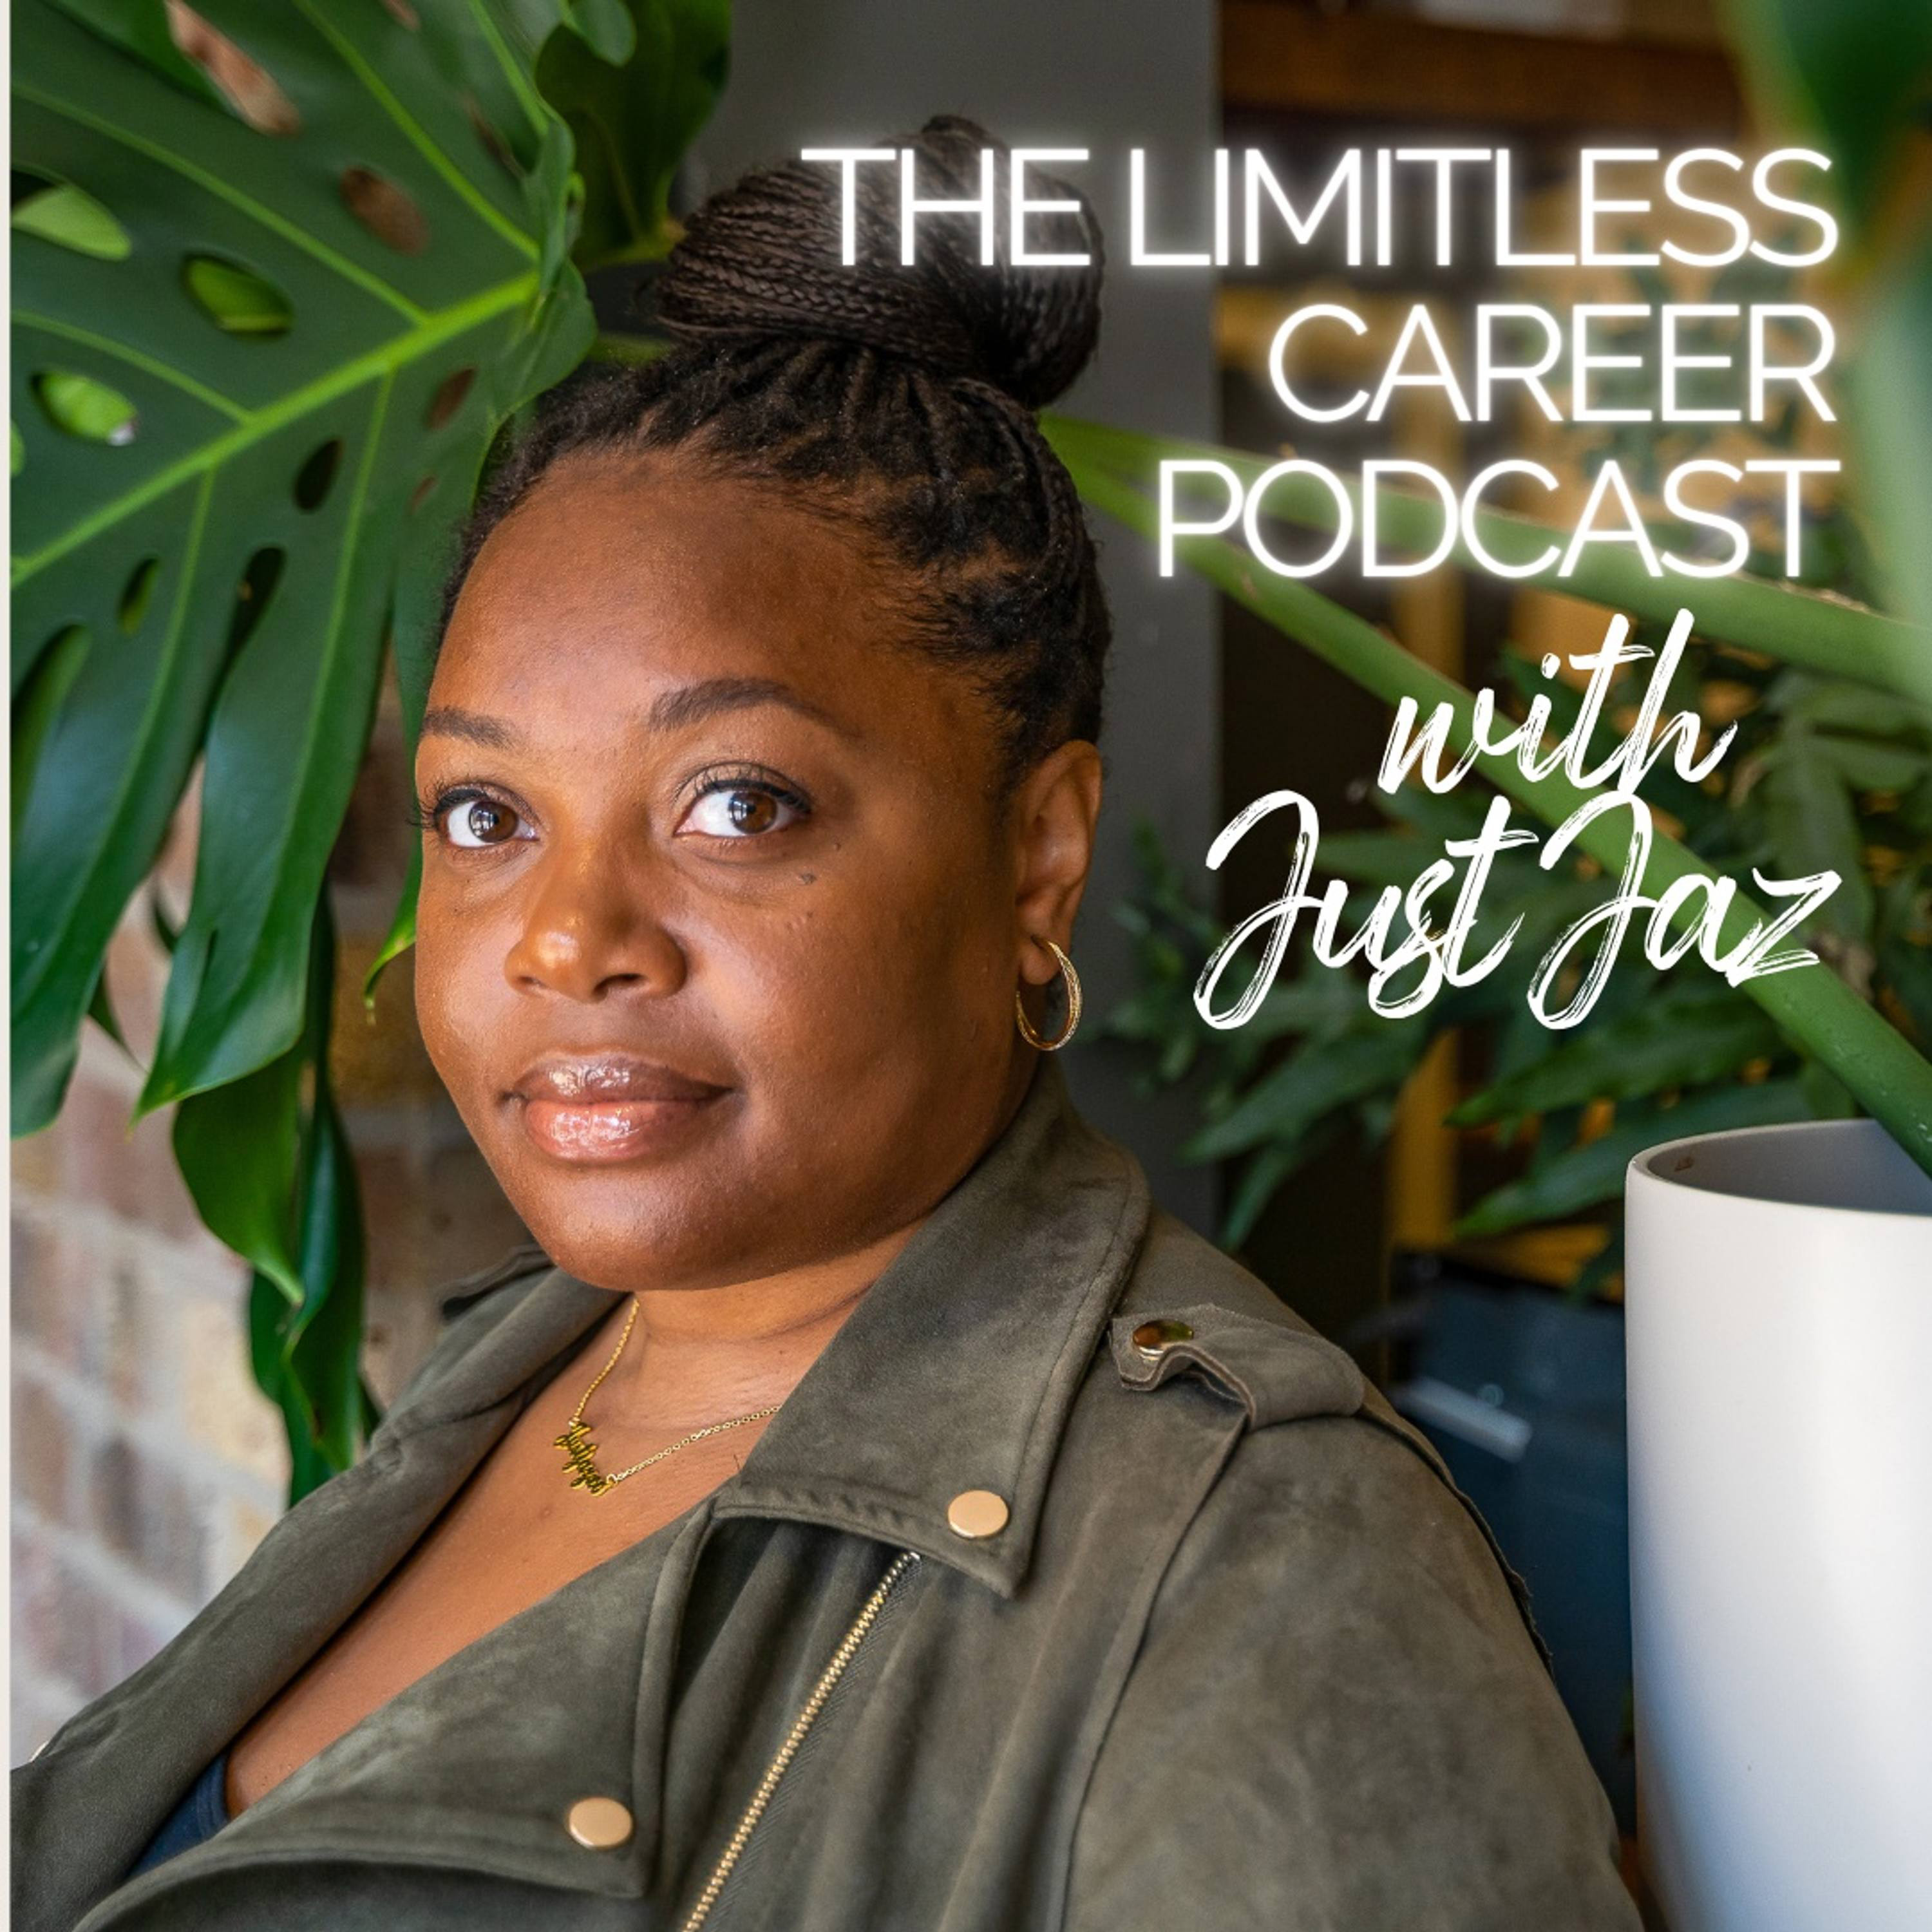 The Limitless Career Podcast